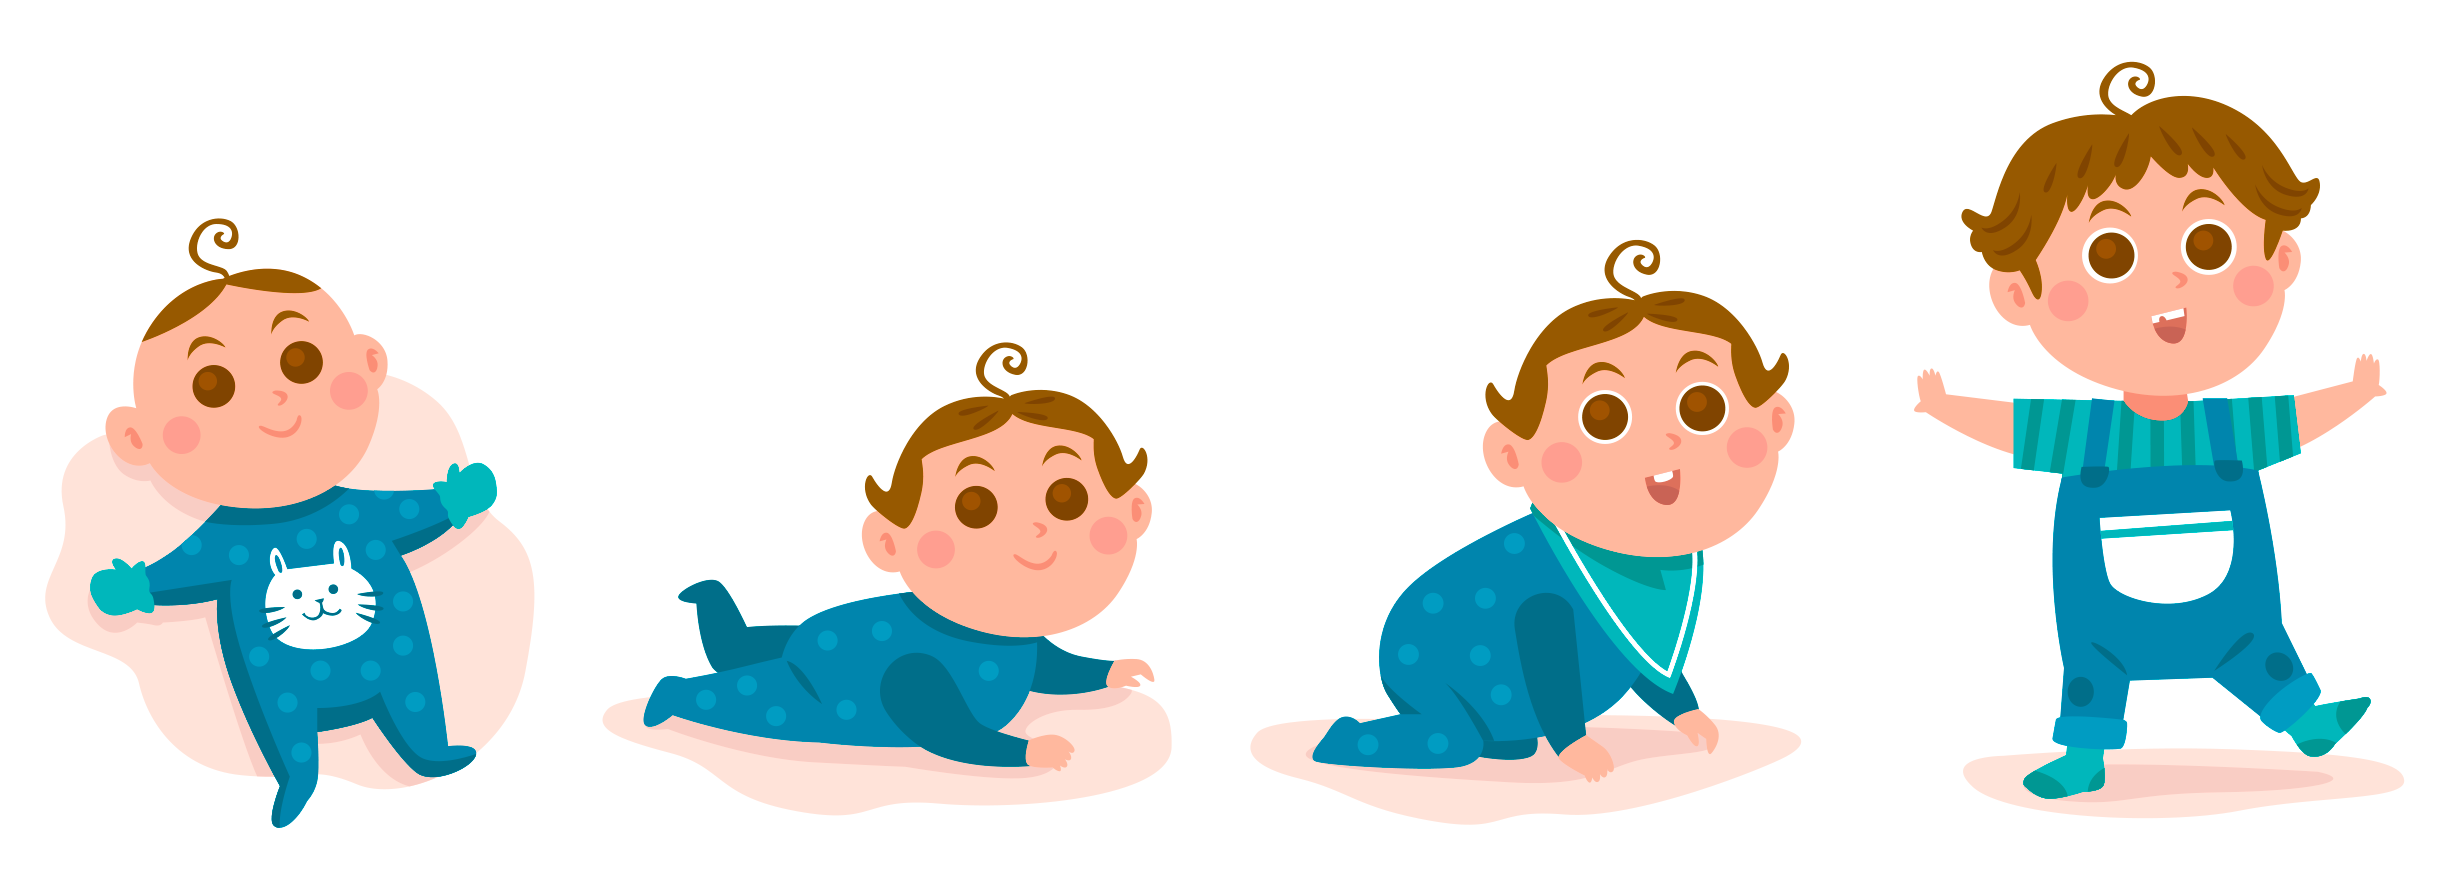 A toddler learning to walk in multiple stages